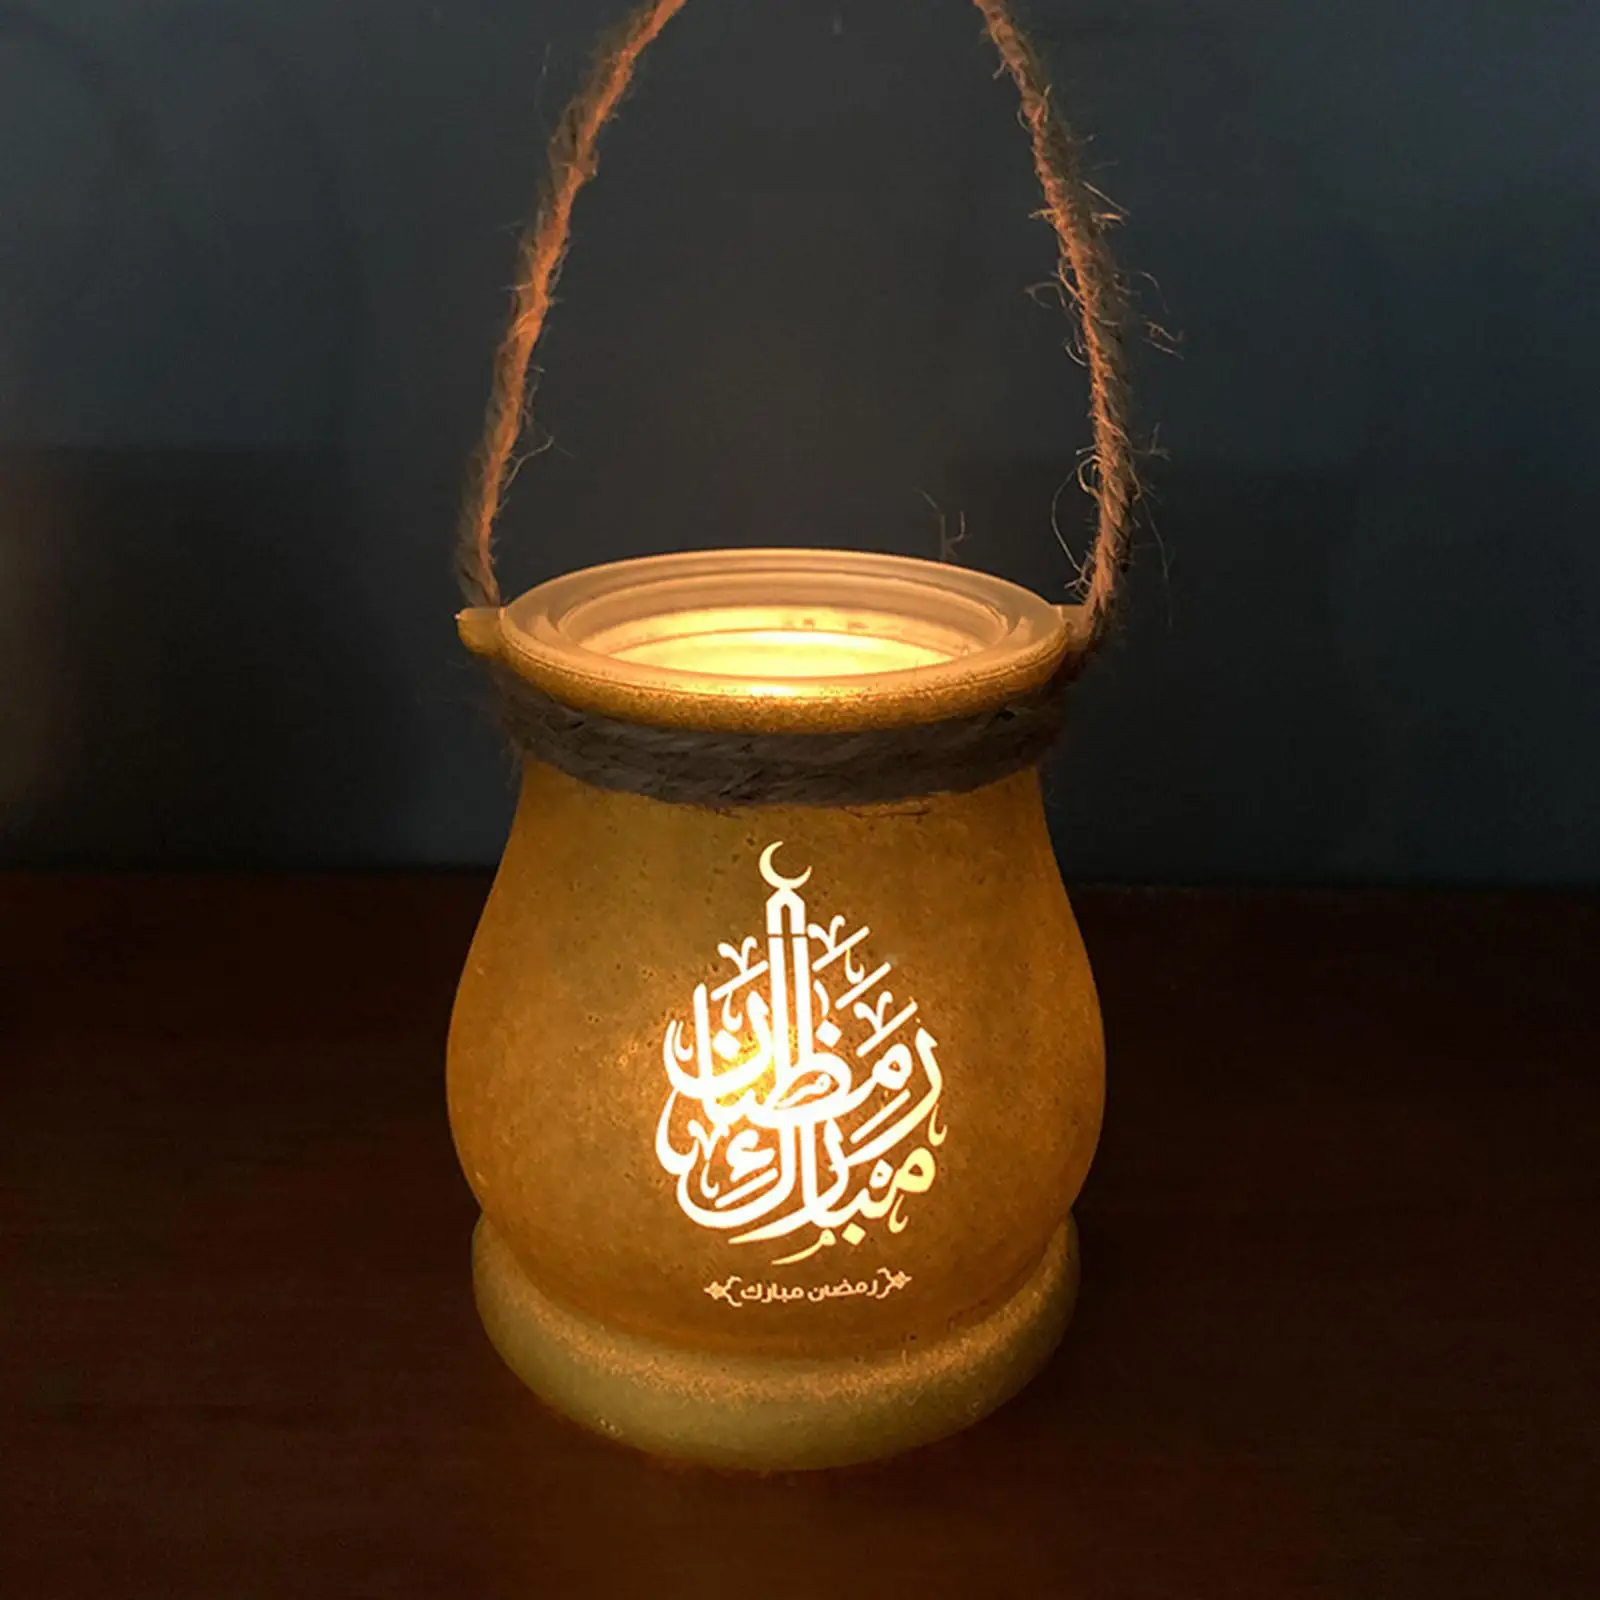 Wood Eid Mubarak Candle Holder Home Decor Hanging Lamp Wall Party Ornaments